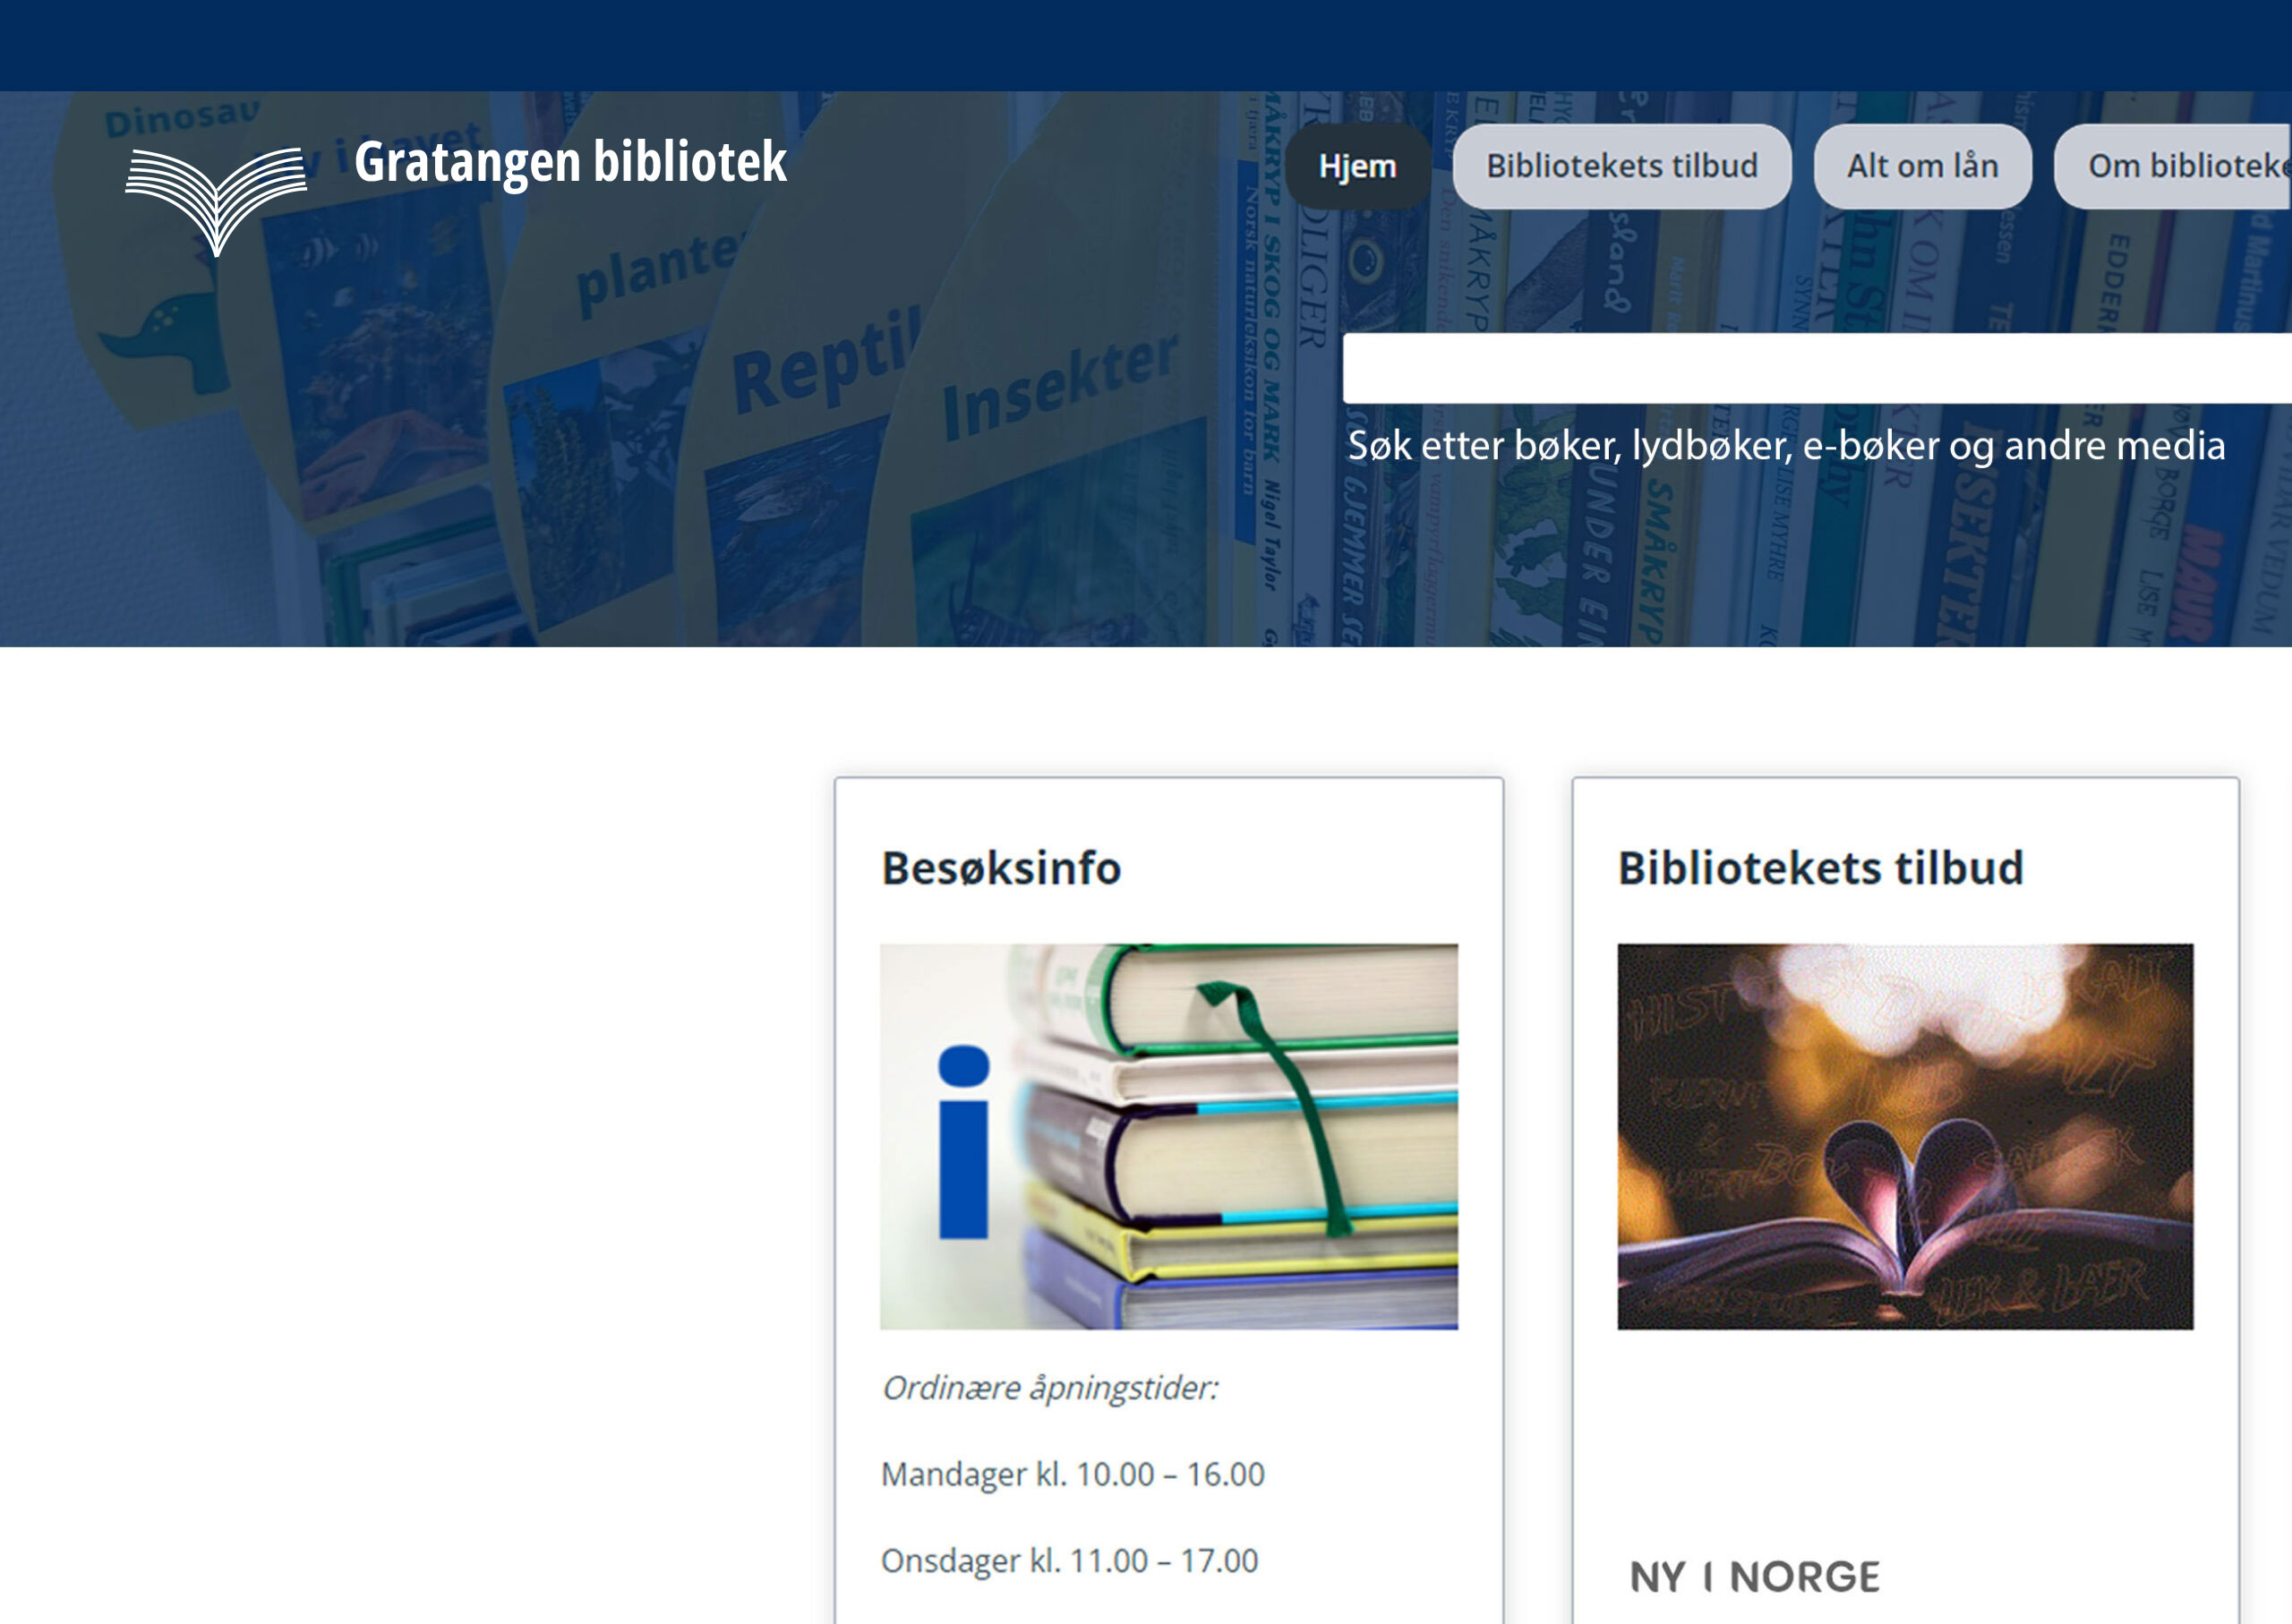 Gratangen library website with the applied new logo